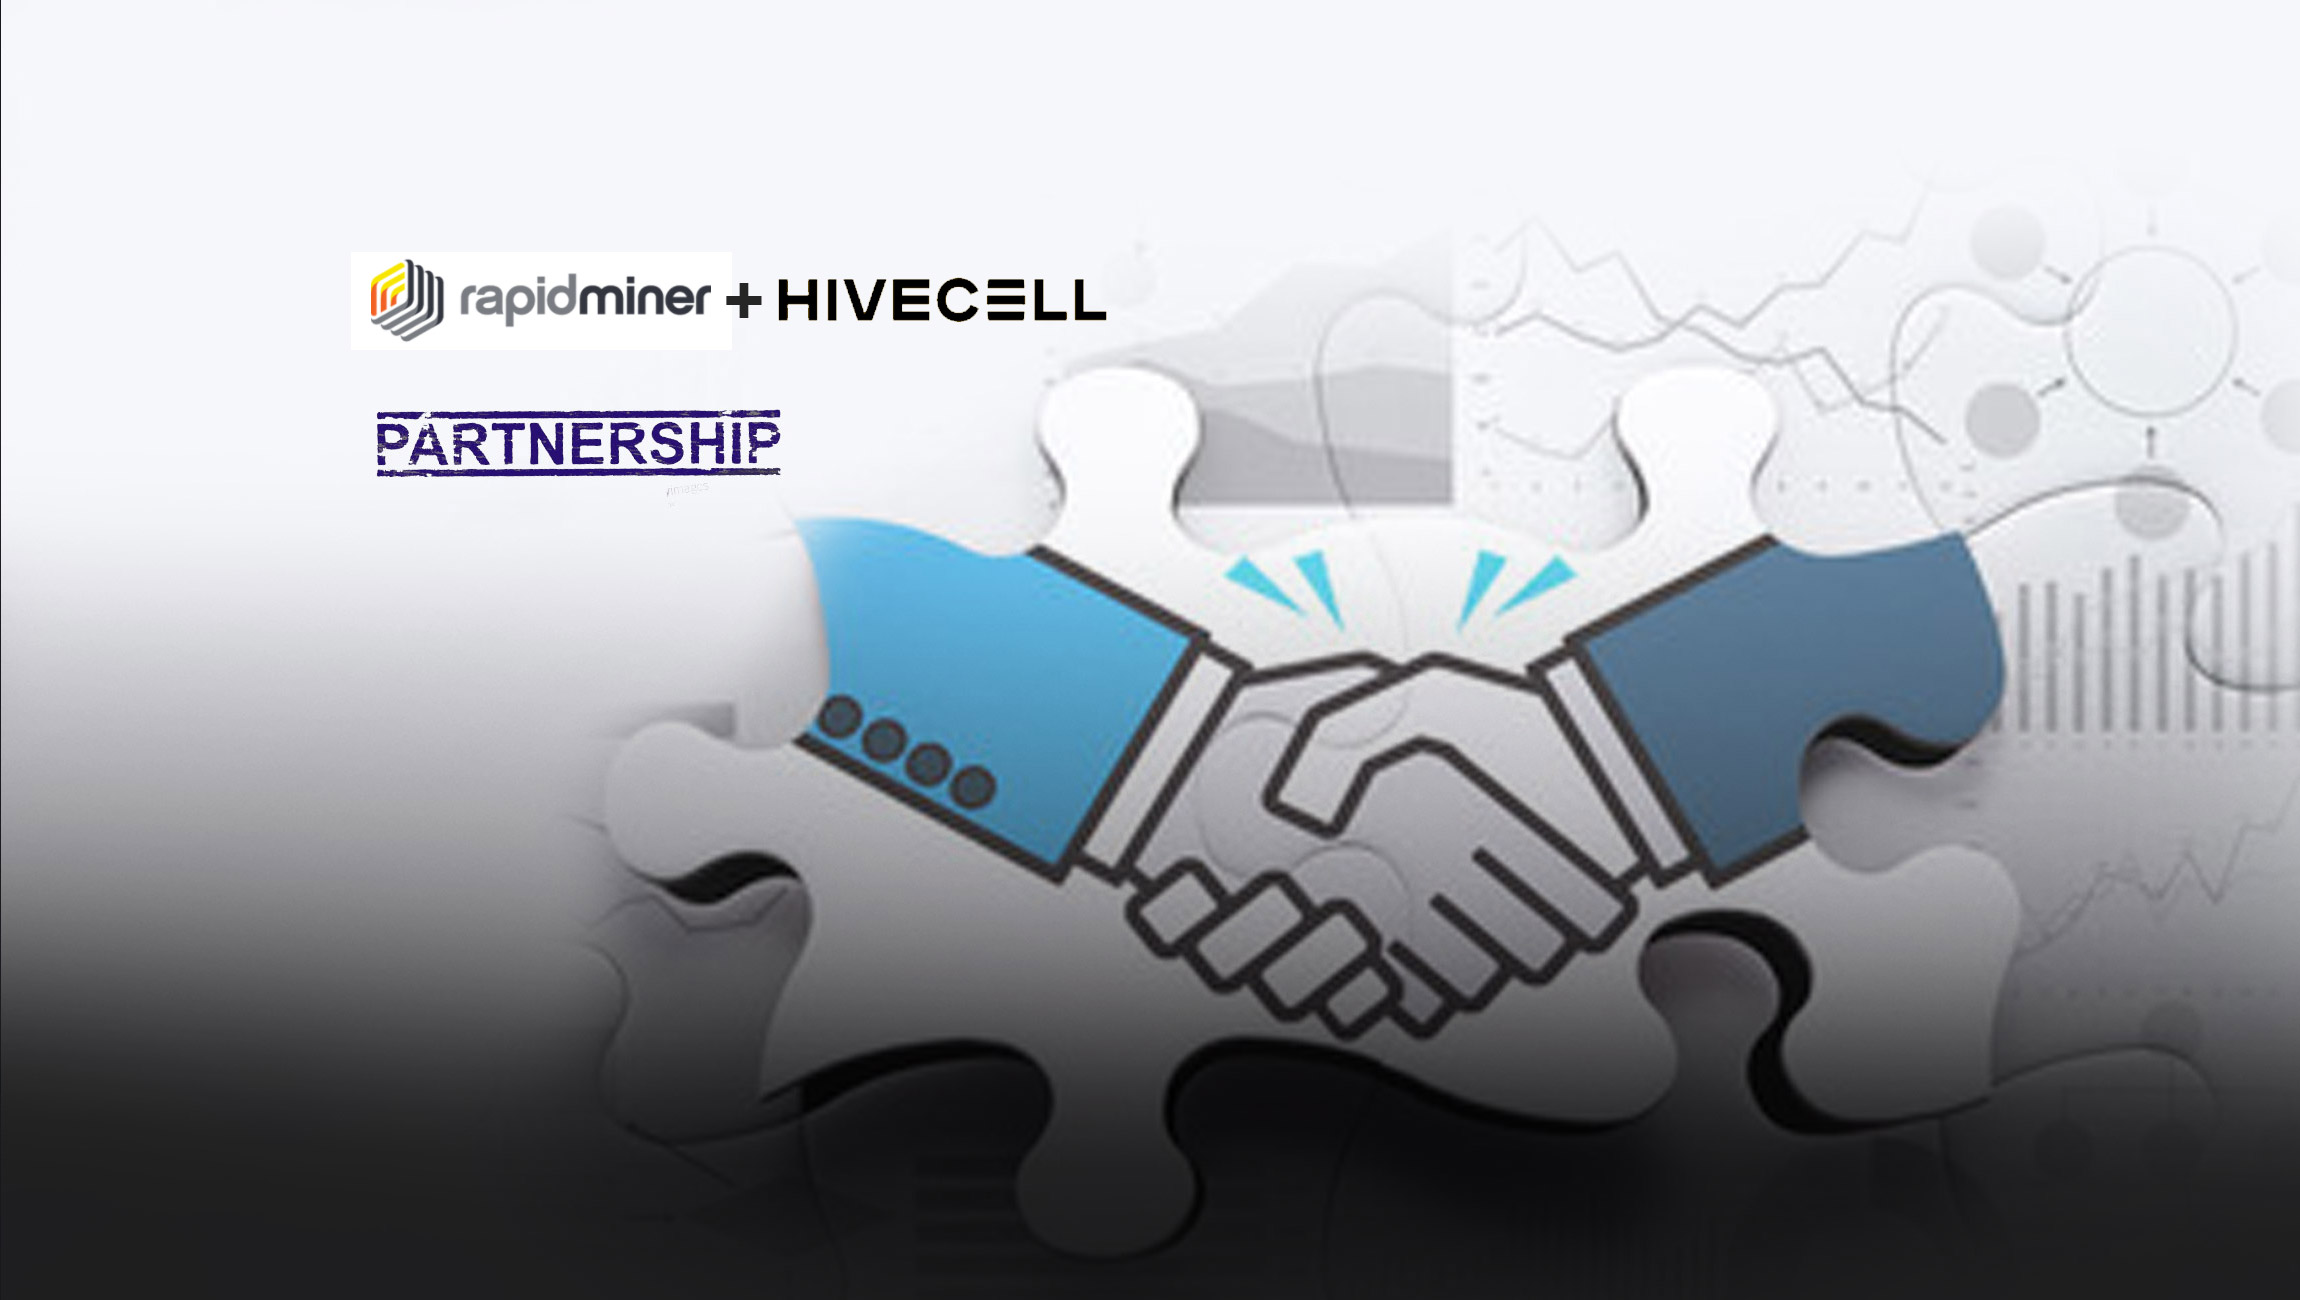 RapidMiner Partners with Hivecell to Enable Real-Time AI at the Edge